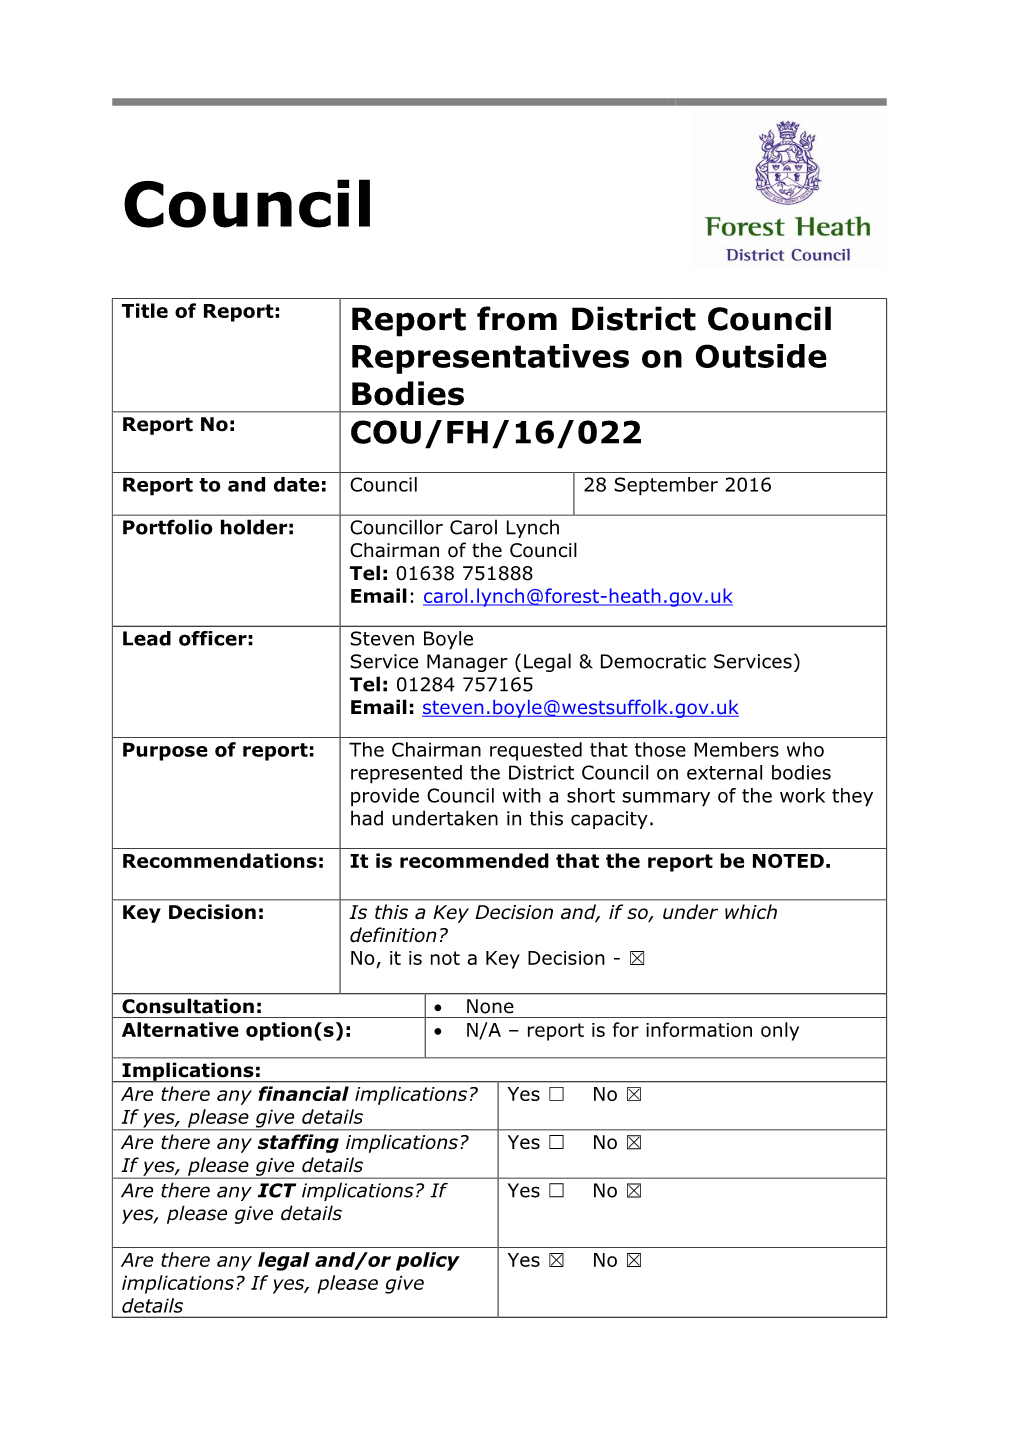 Forest Heath District Council Representatives on Outside Bodies Were Appointed in 2015 for a Four-Year Period Expiring in 2019: (*Non Elected Member)